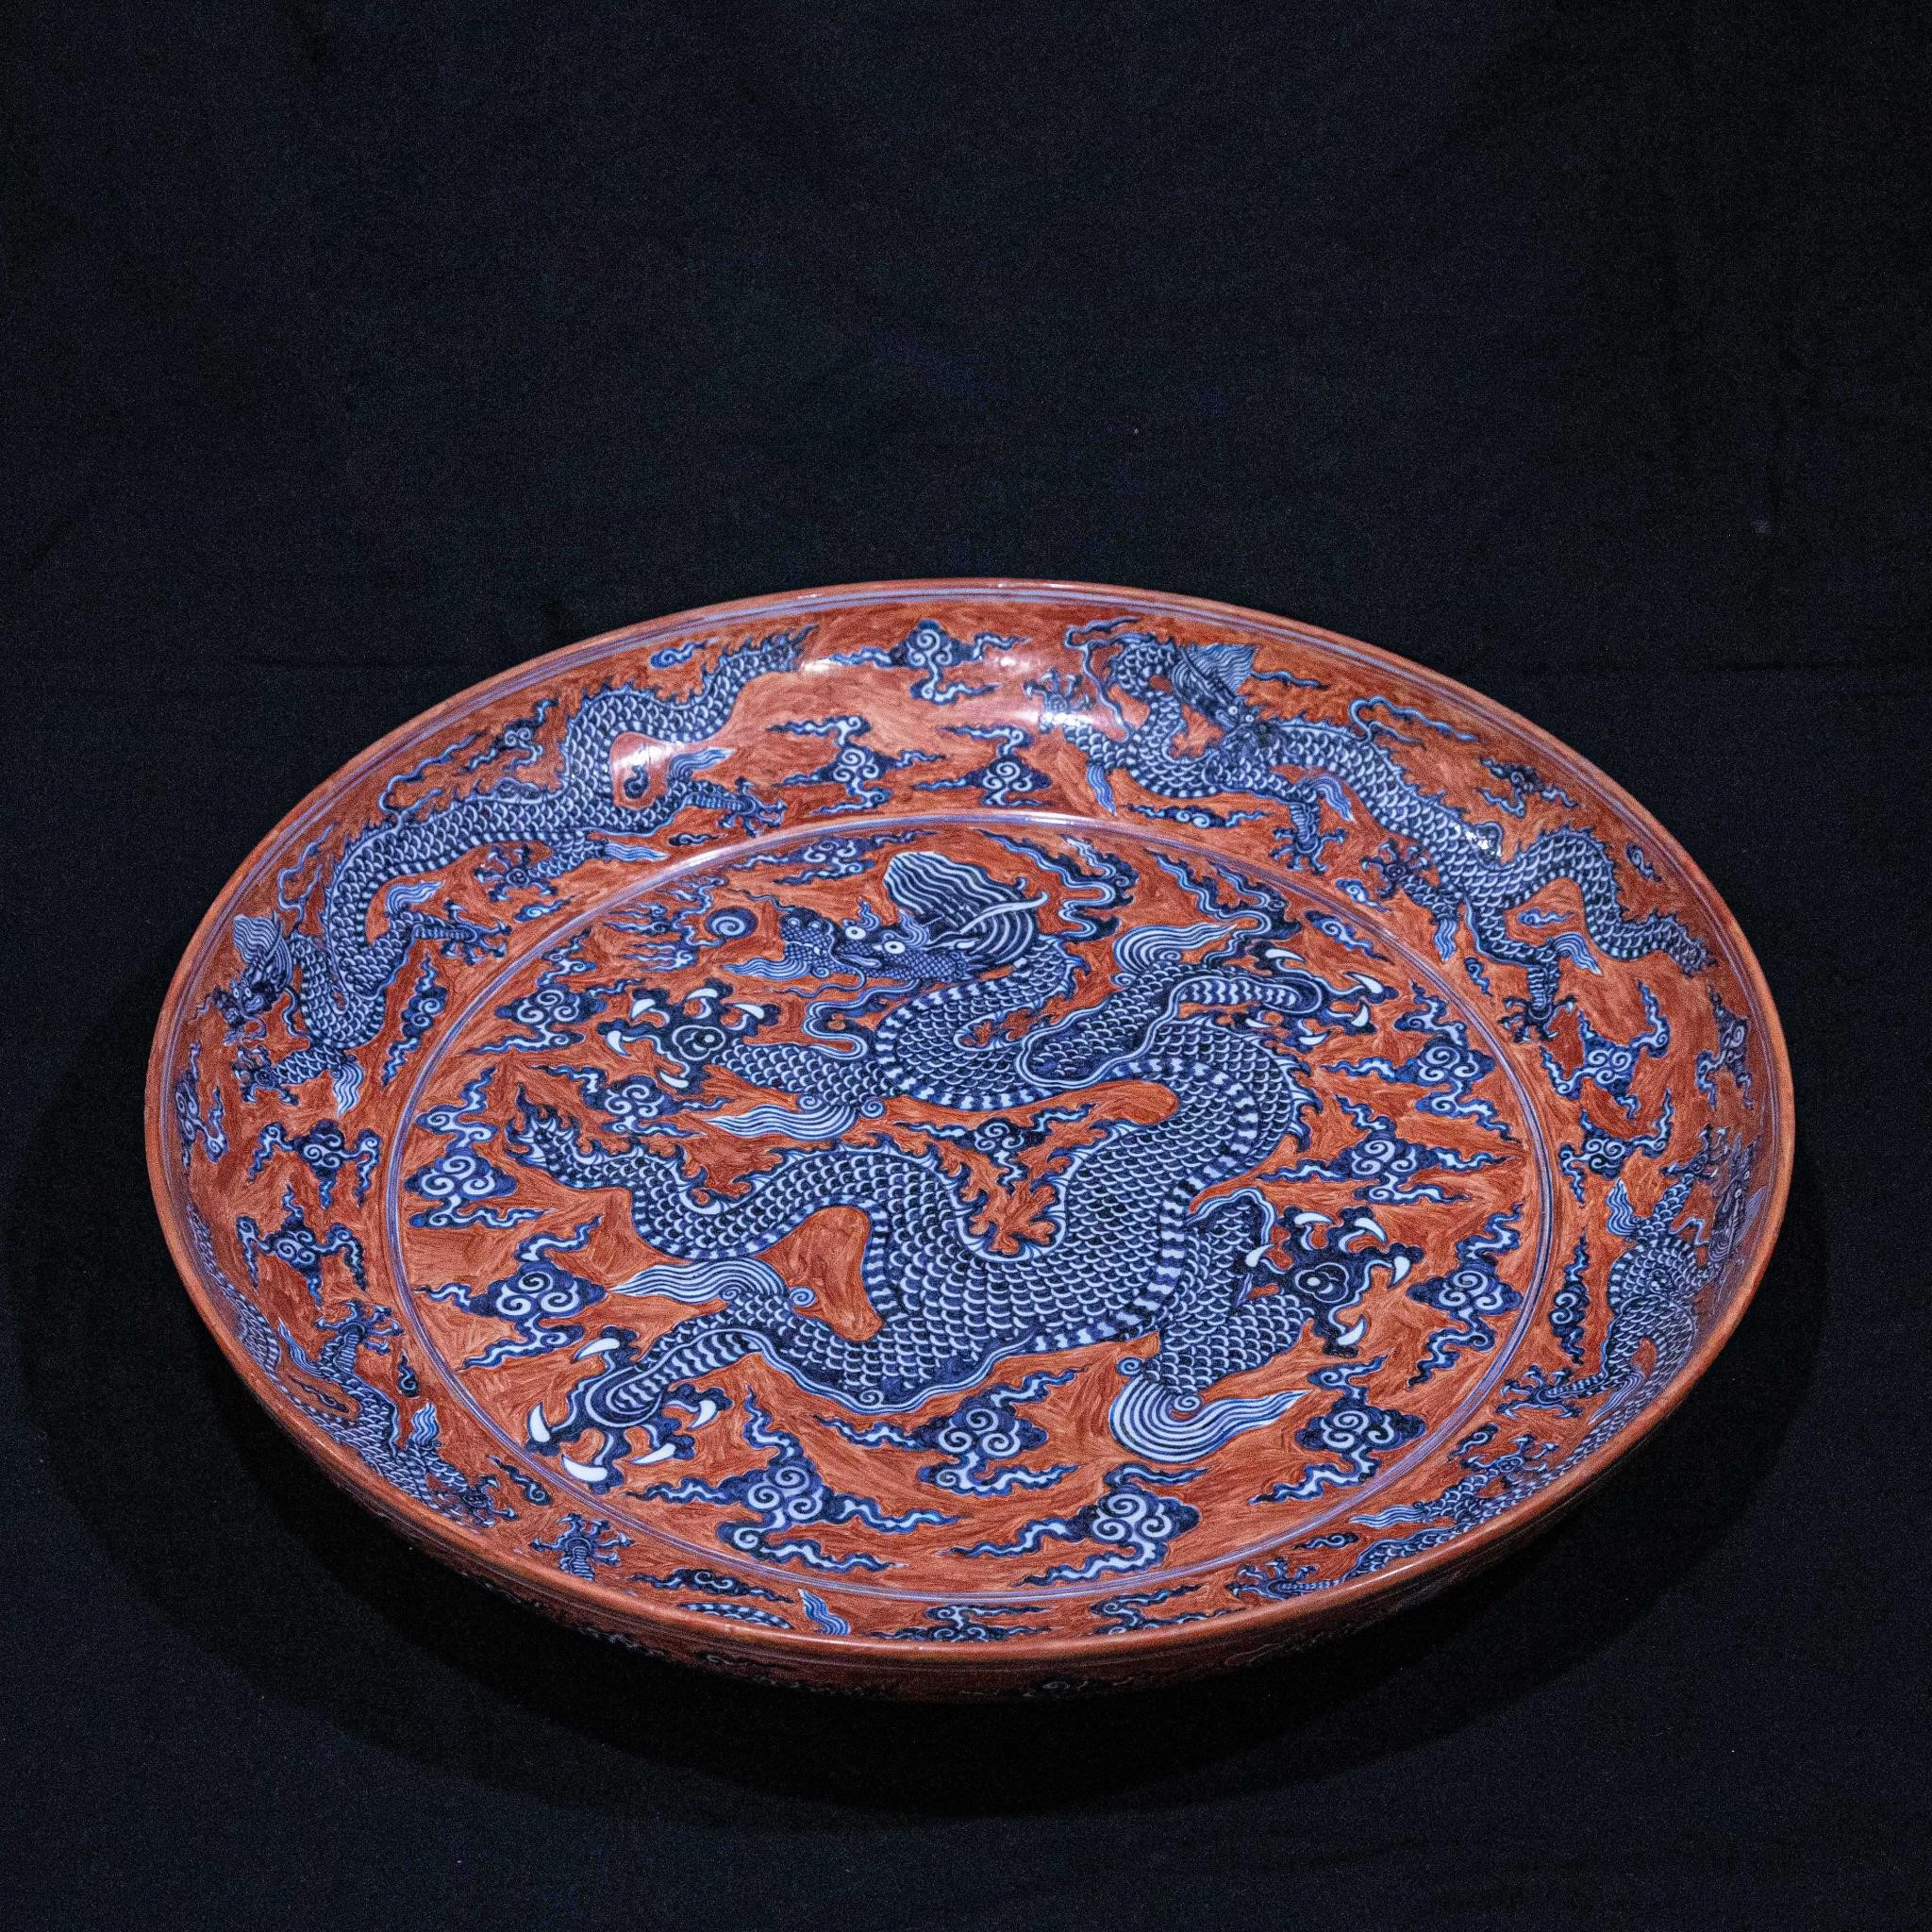 Dragon patterned plate